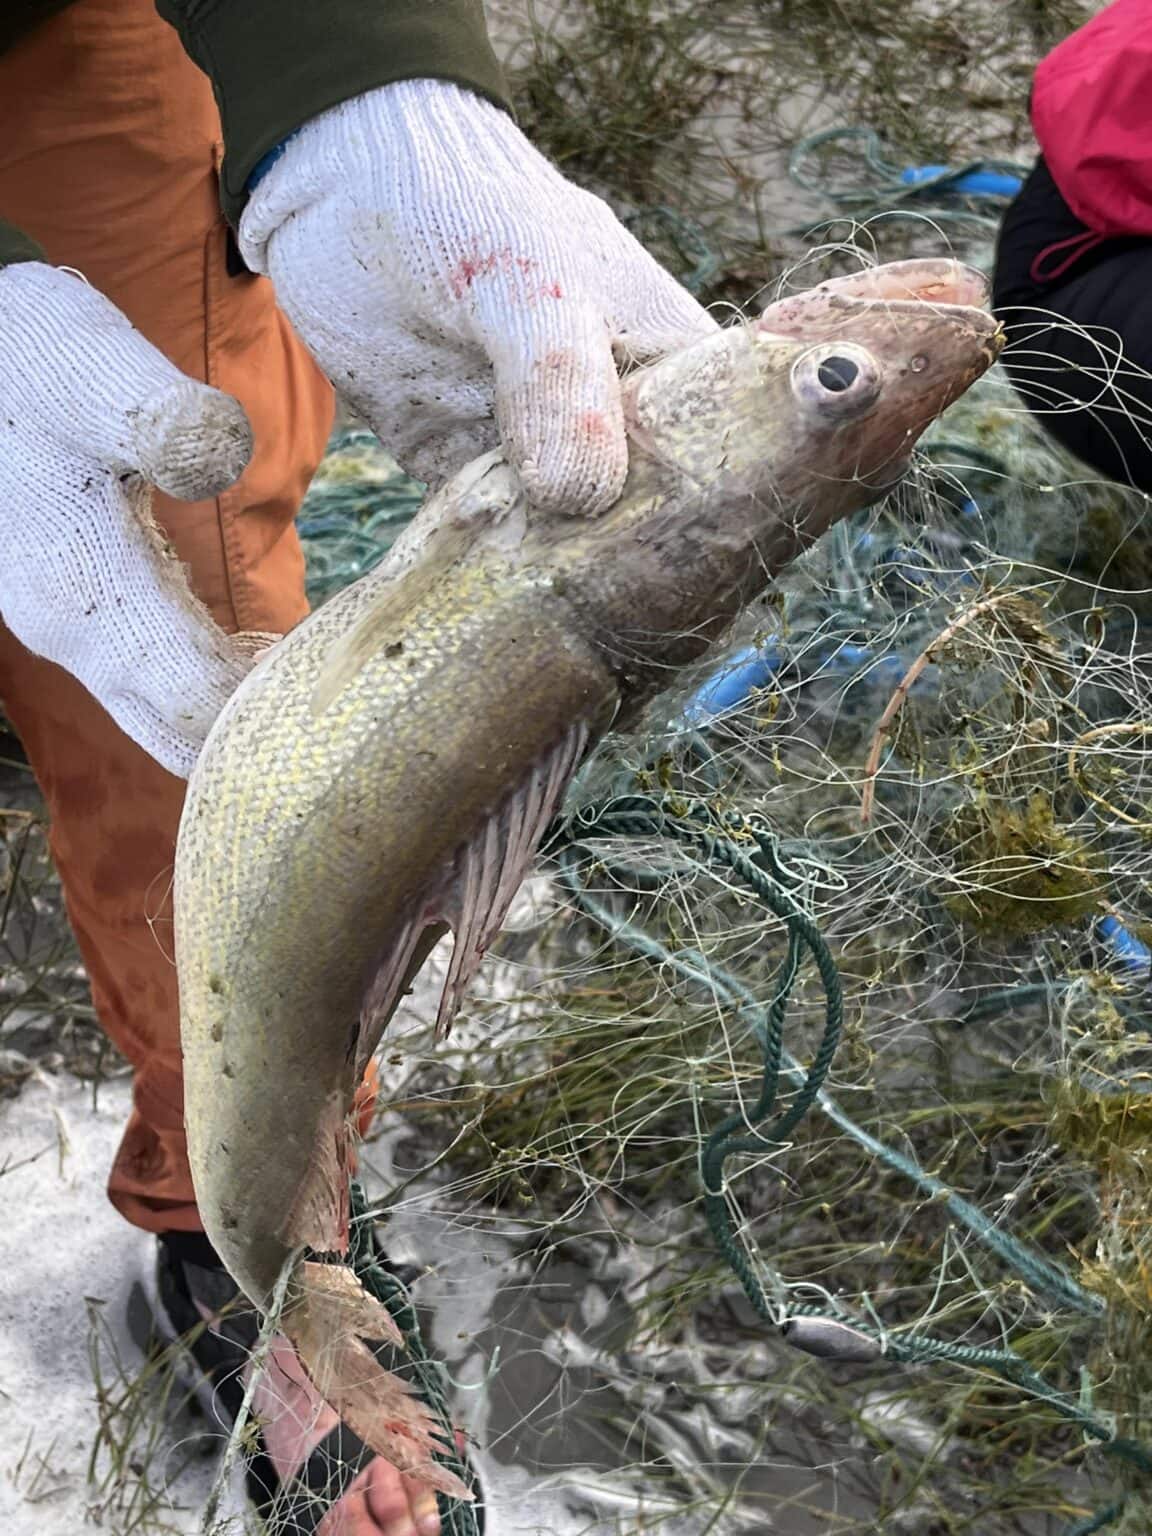 Someone holding a fish